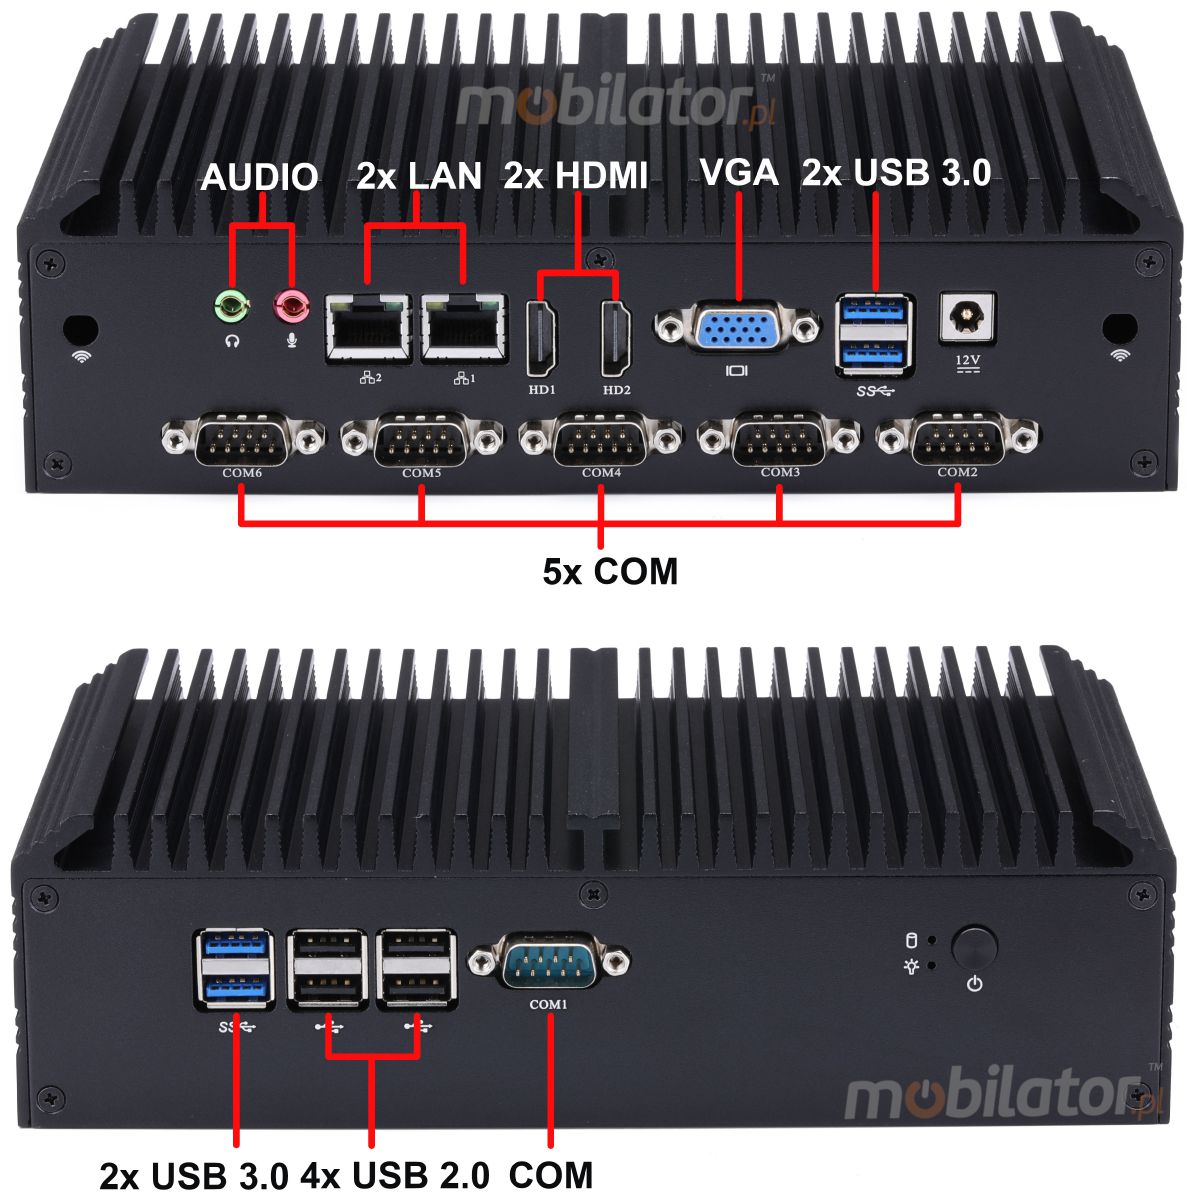 mBox X155 v.3 - Industrial Mini Computer with Intel Celeron 3865U Processor - M.2 disk (with second disk option) - USB 3.0, 2x HDMI and WiFi - Interfaces